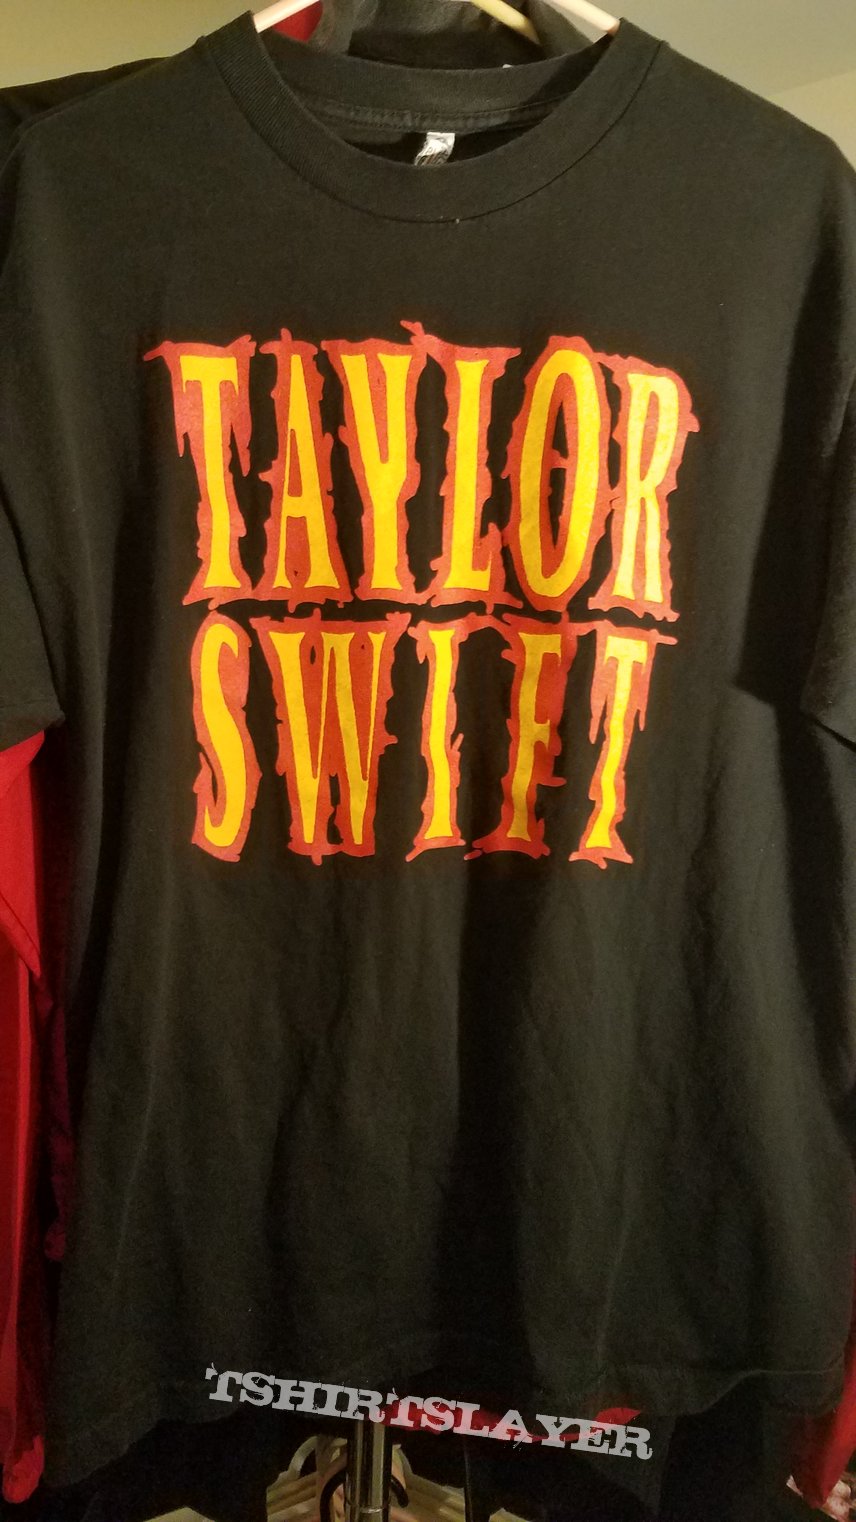 Screaming, Crying, Perfect Storms Baby T-Shirt – Taylor Swift